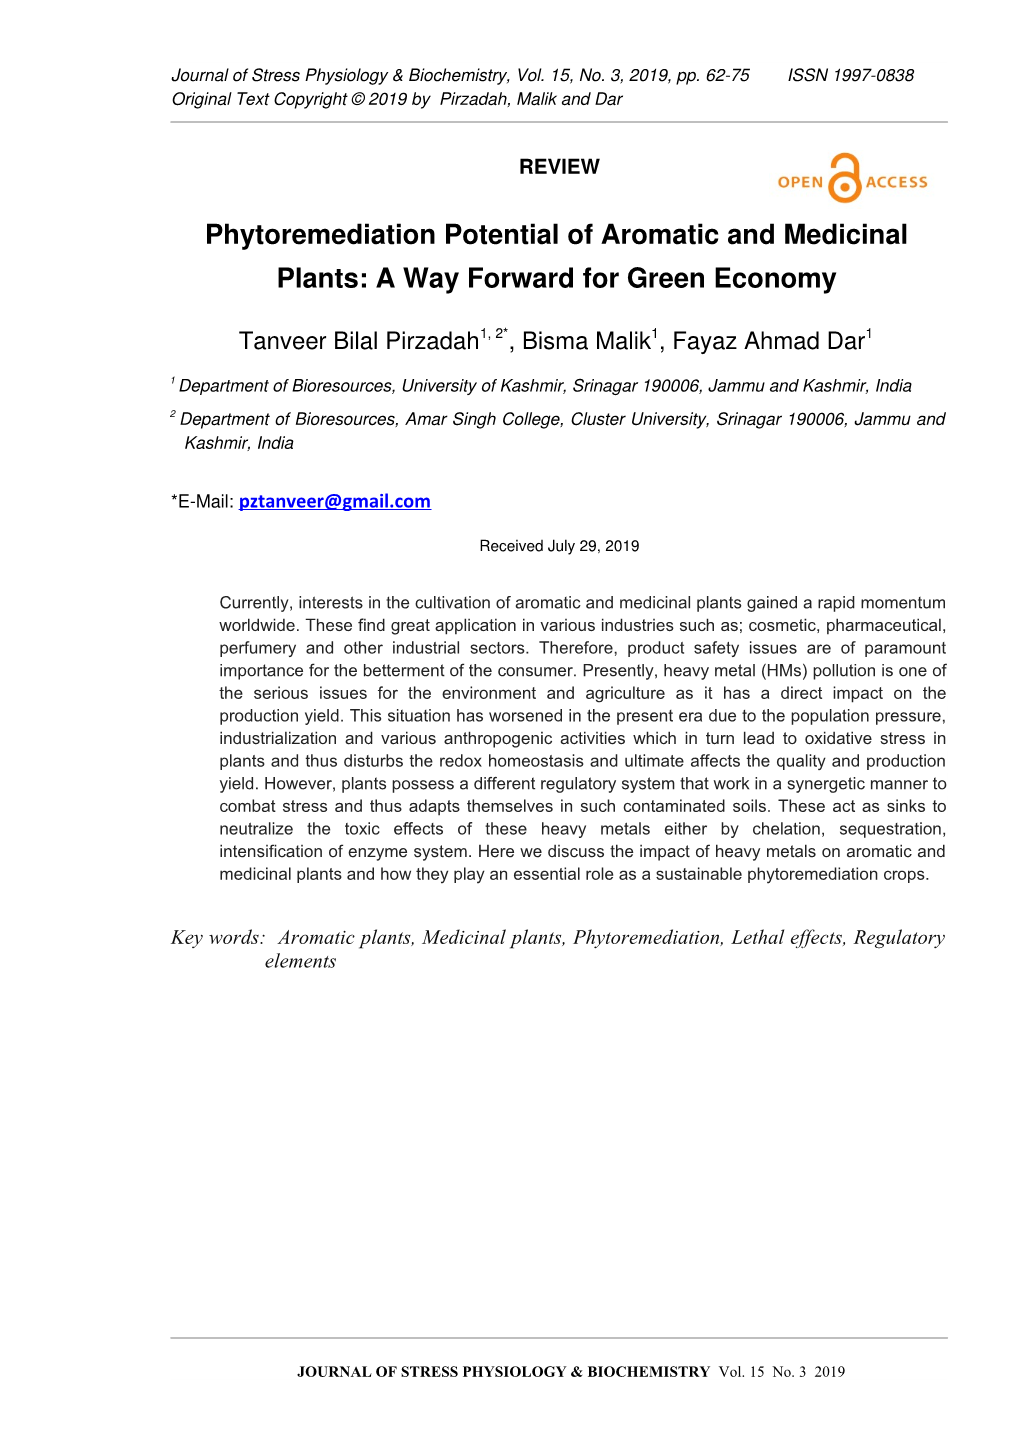 Phytoremediation Potential of Aromatic and Medicinal Plants: a Way Forward for Green Economy